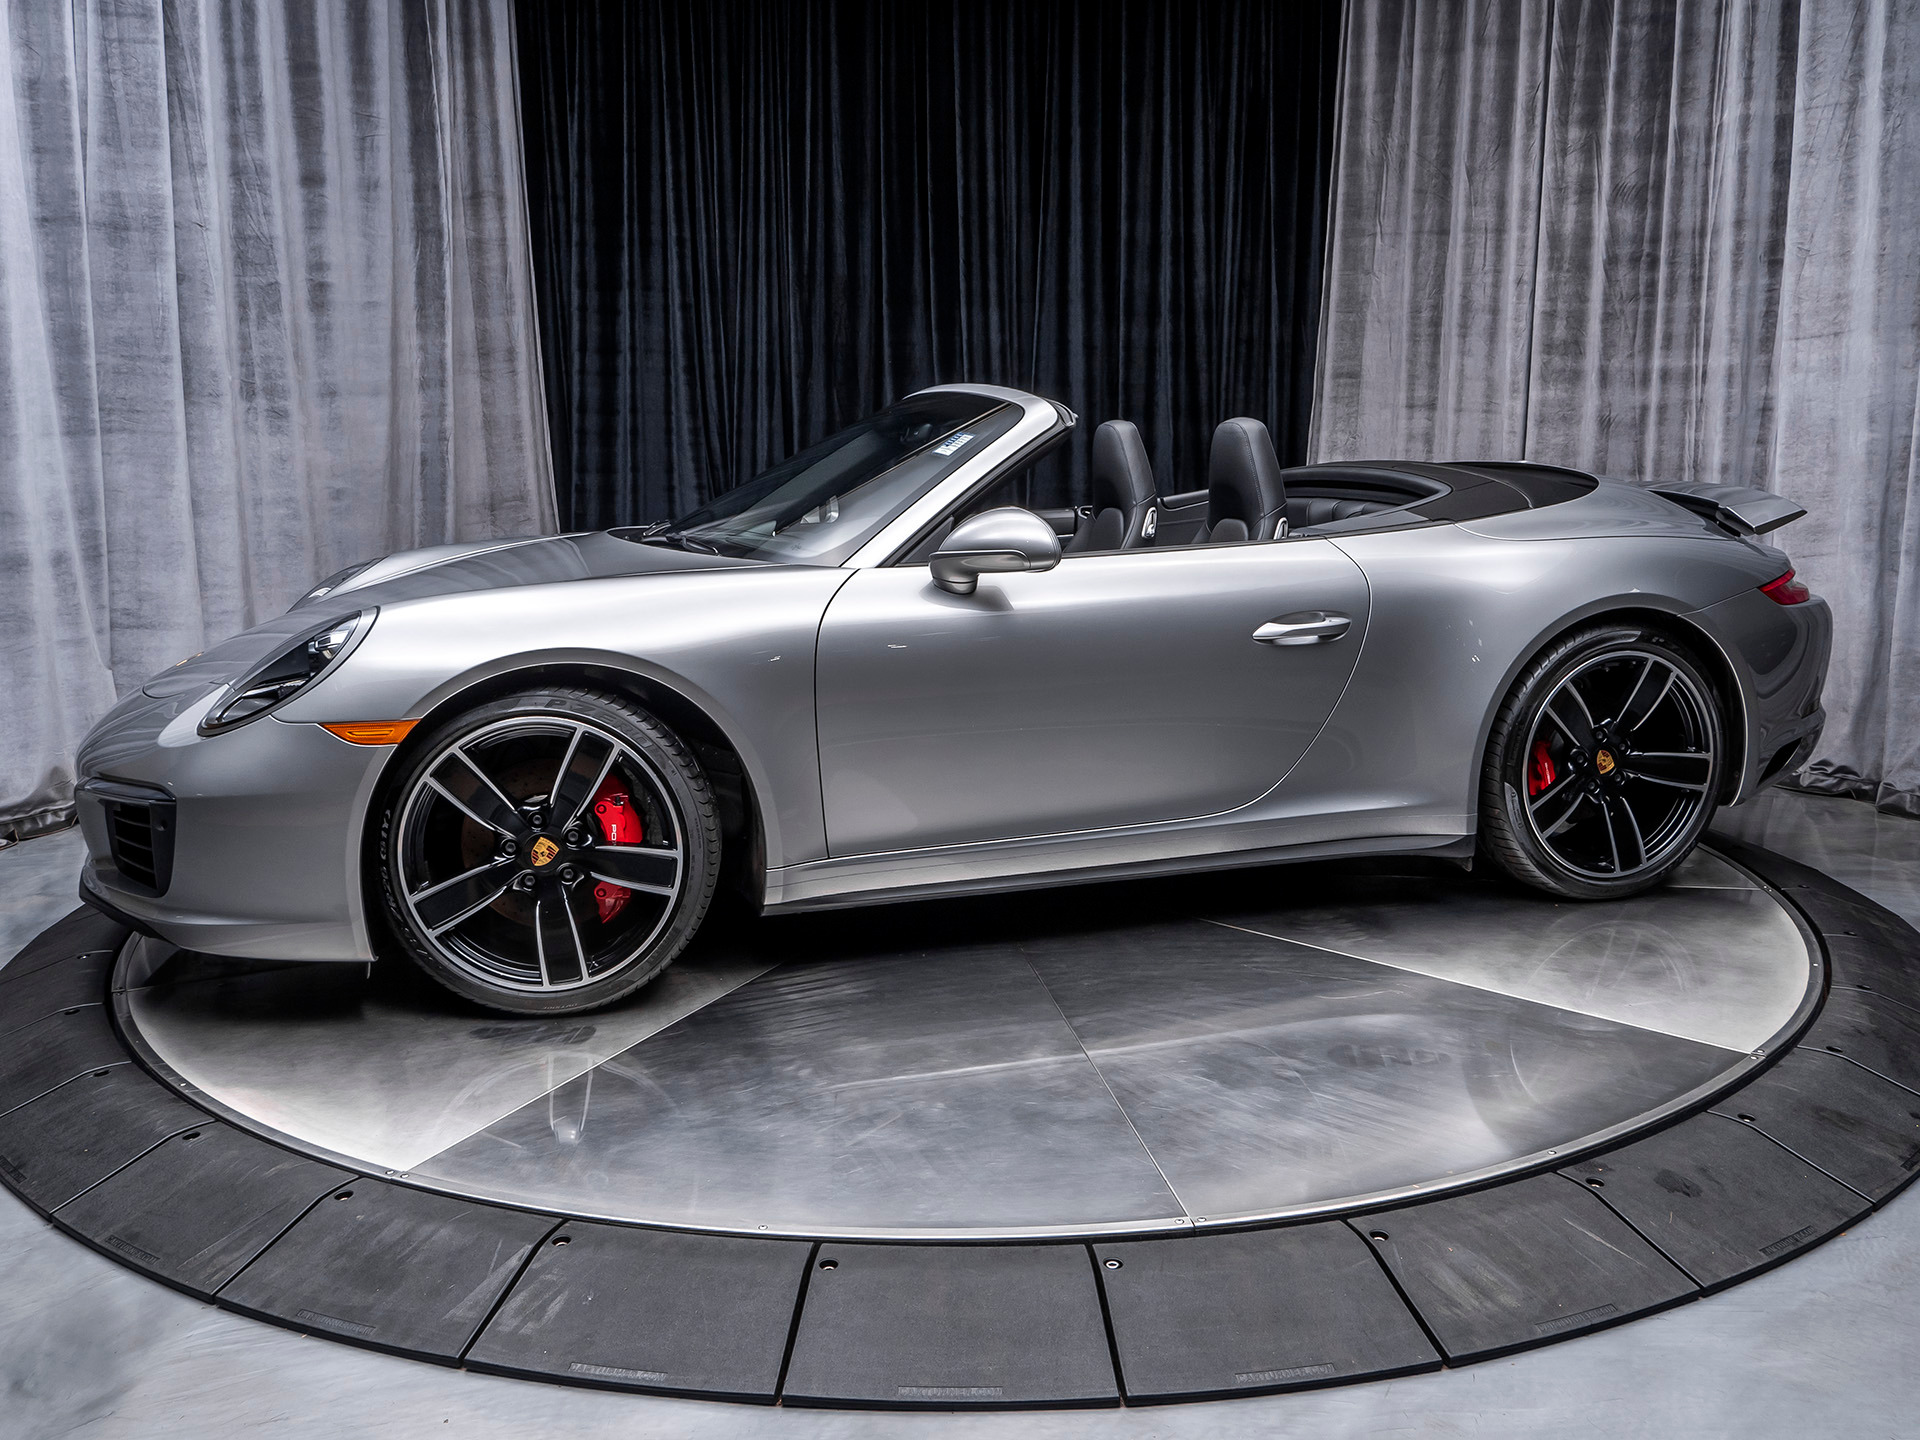 Used 2018 Porsche 911 Carrera 4S Convertible MSRP $152K+ For Sale (Special  Pricing) | Chicago Motor Cars Stock #15989